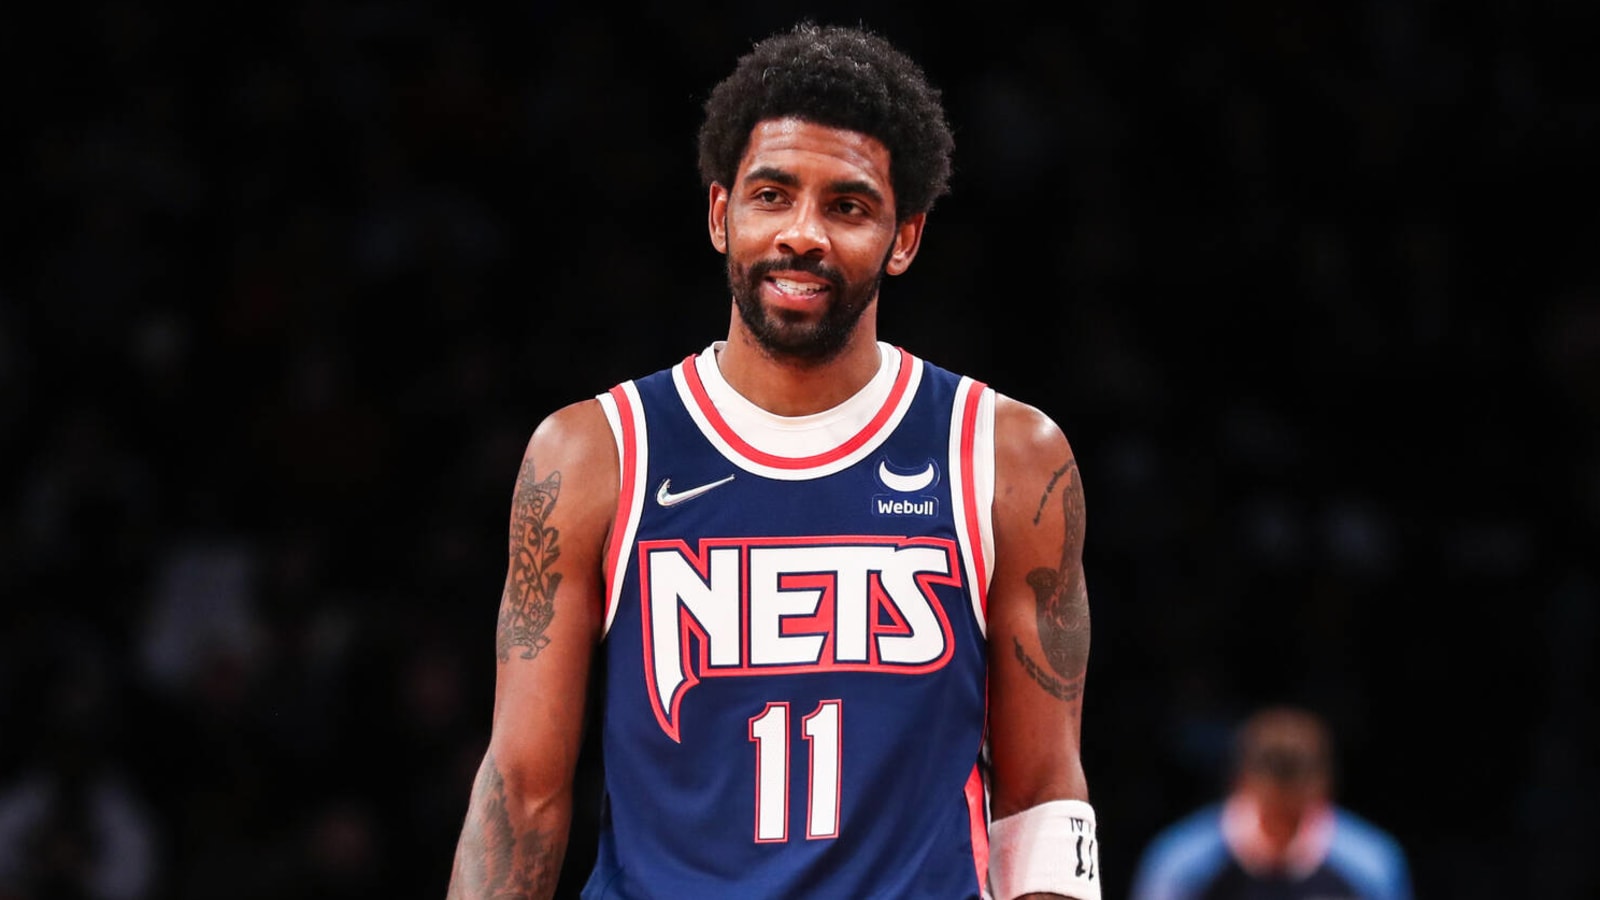 Kyrie admits he thought Nets might trade him during season